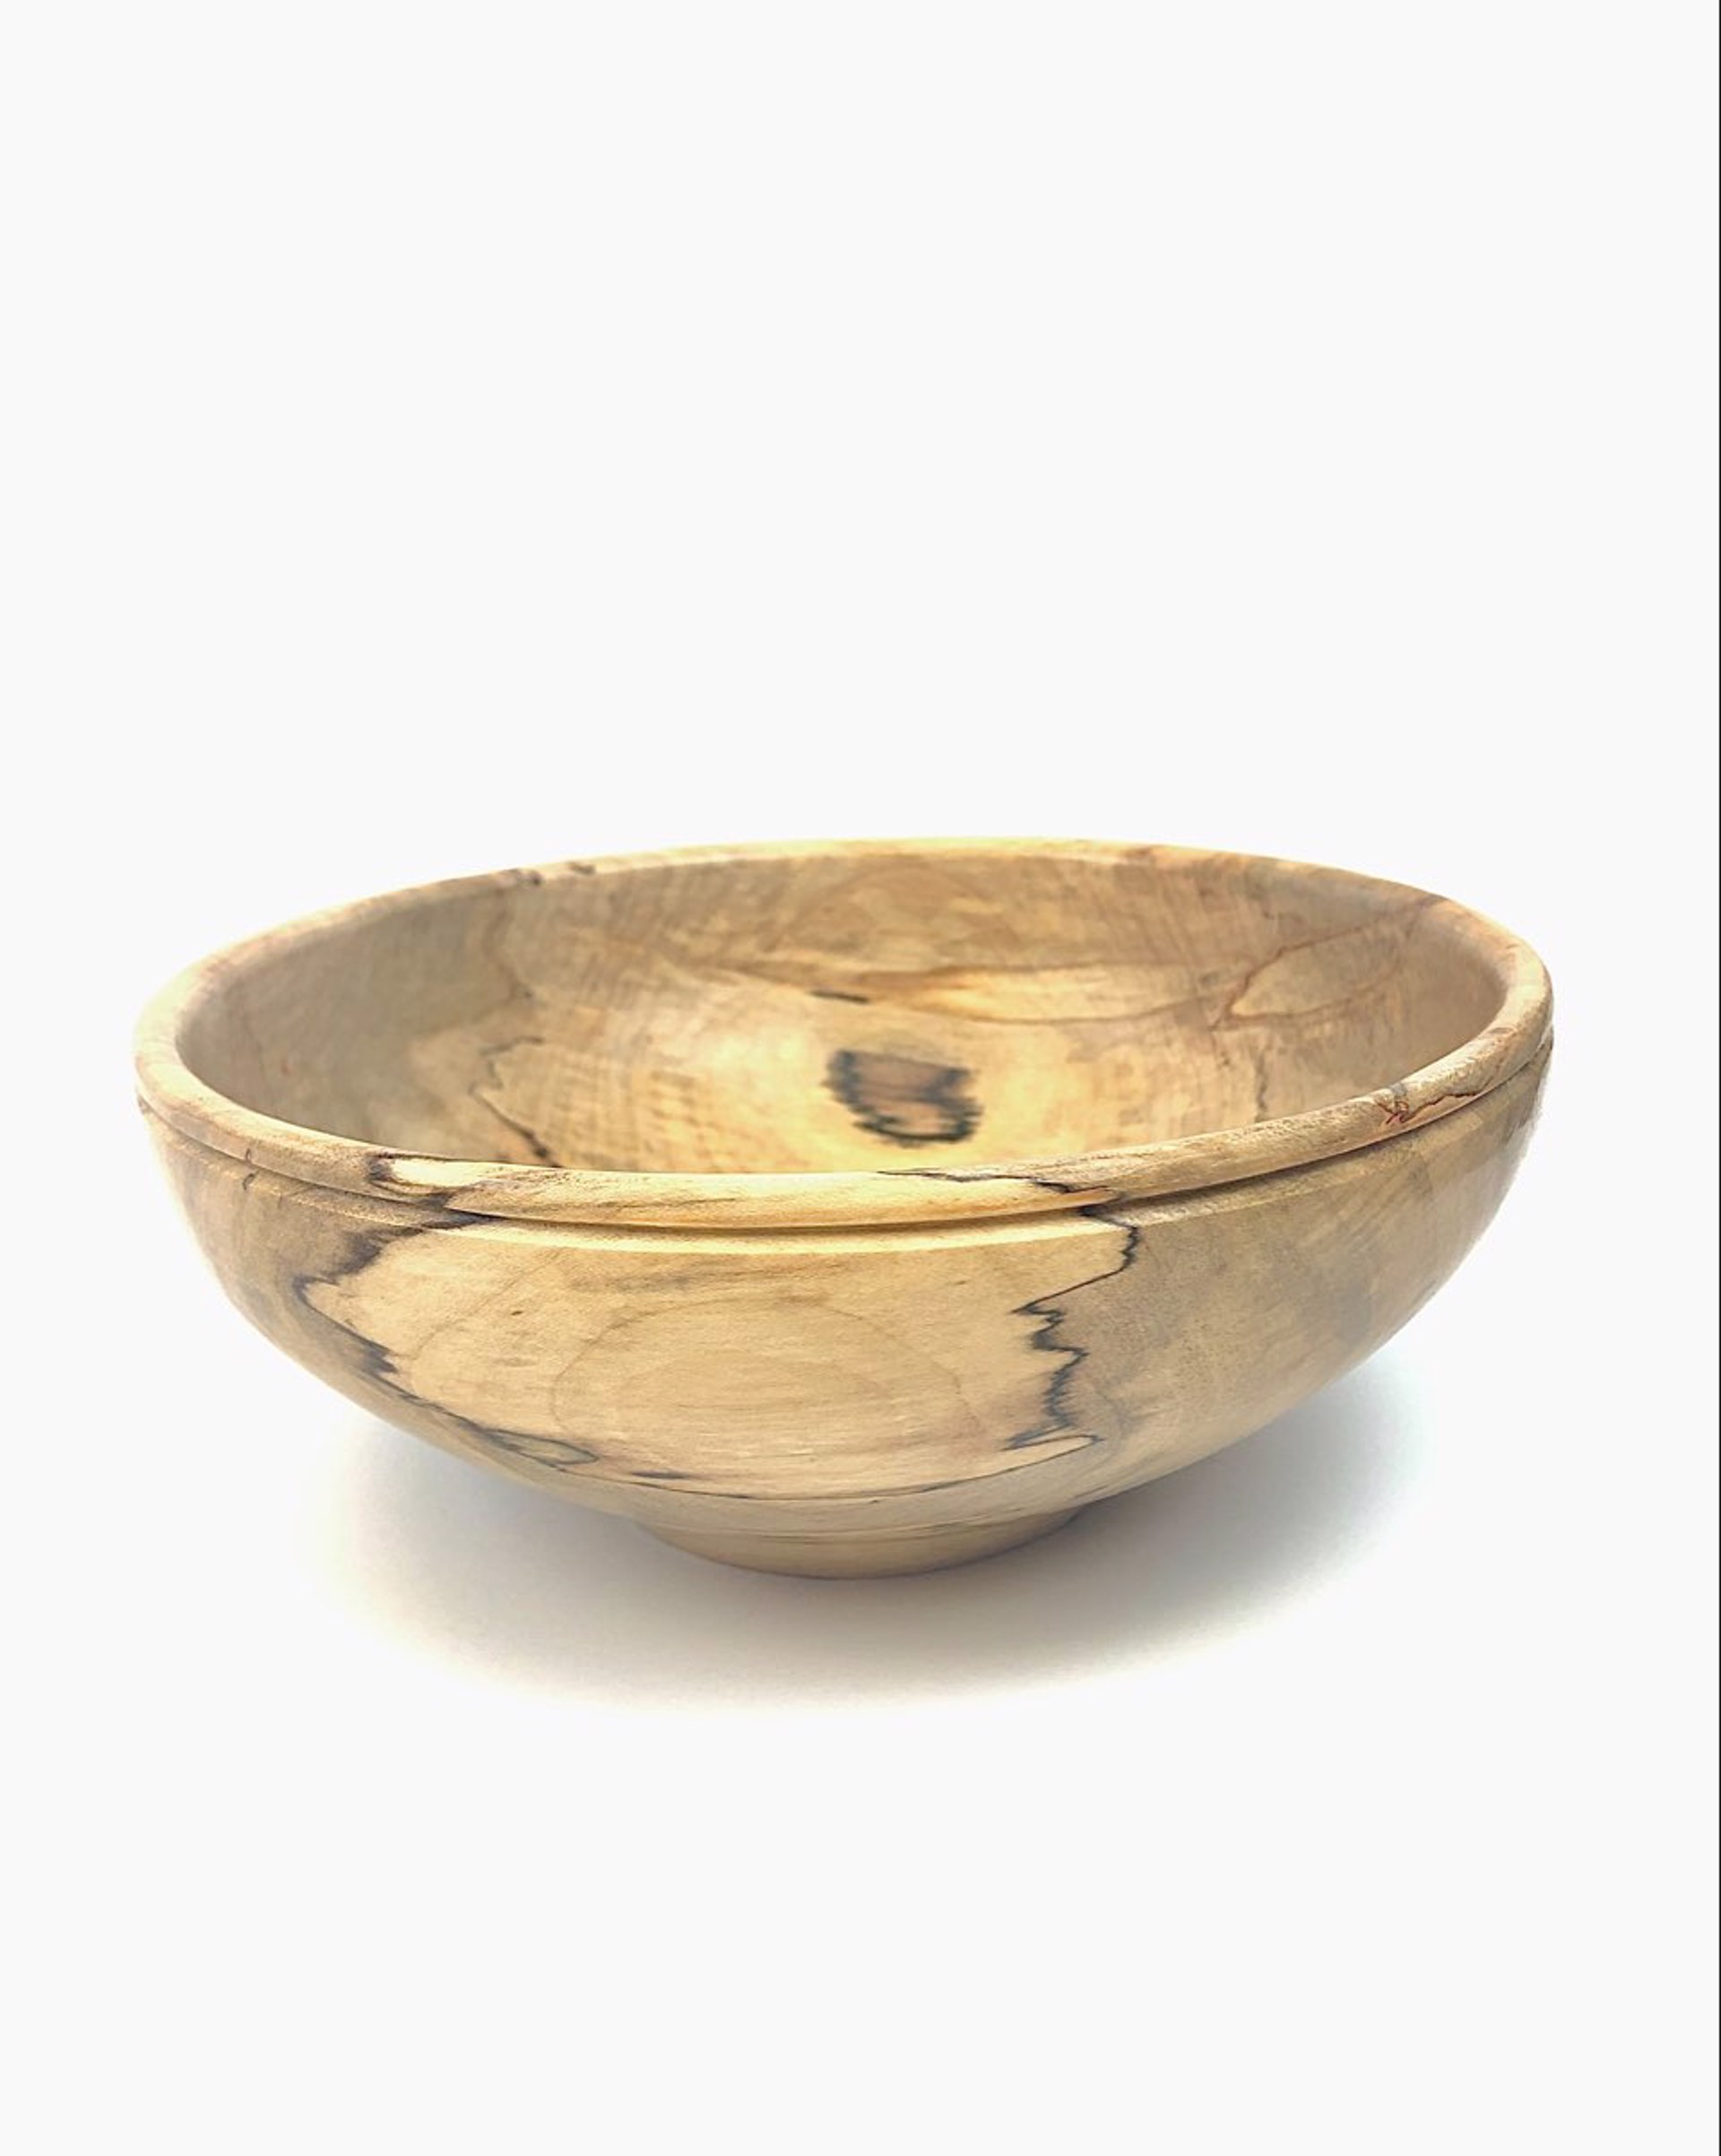 Maple Bowl by Don Moore